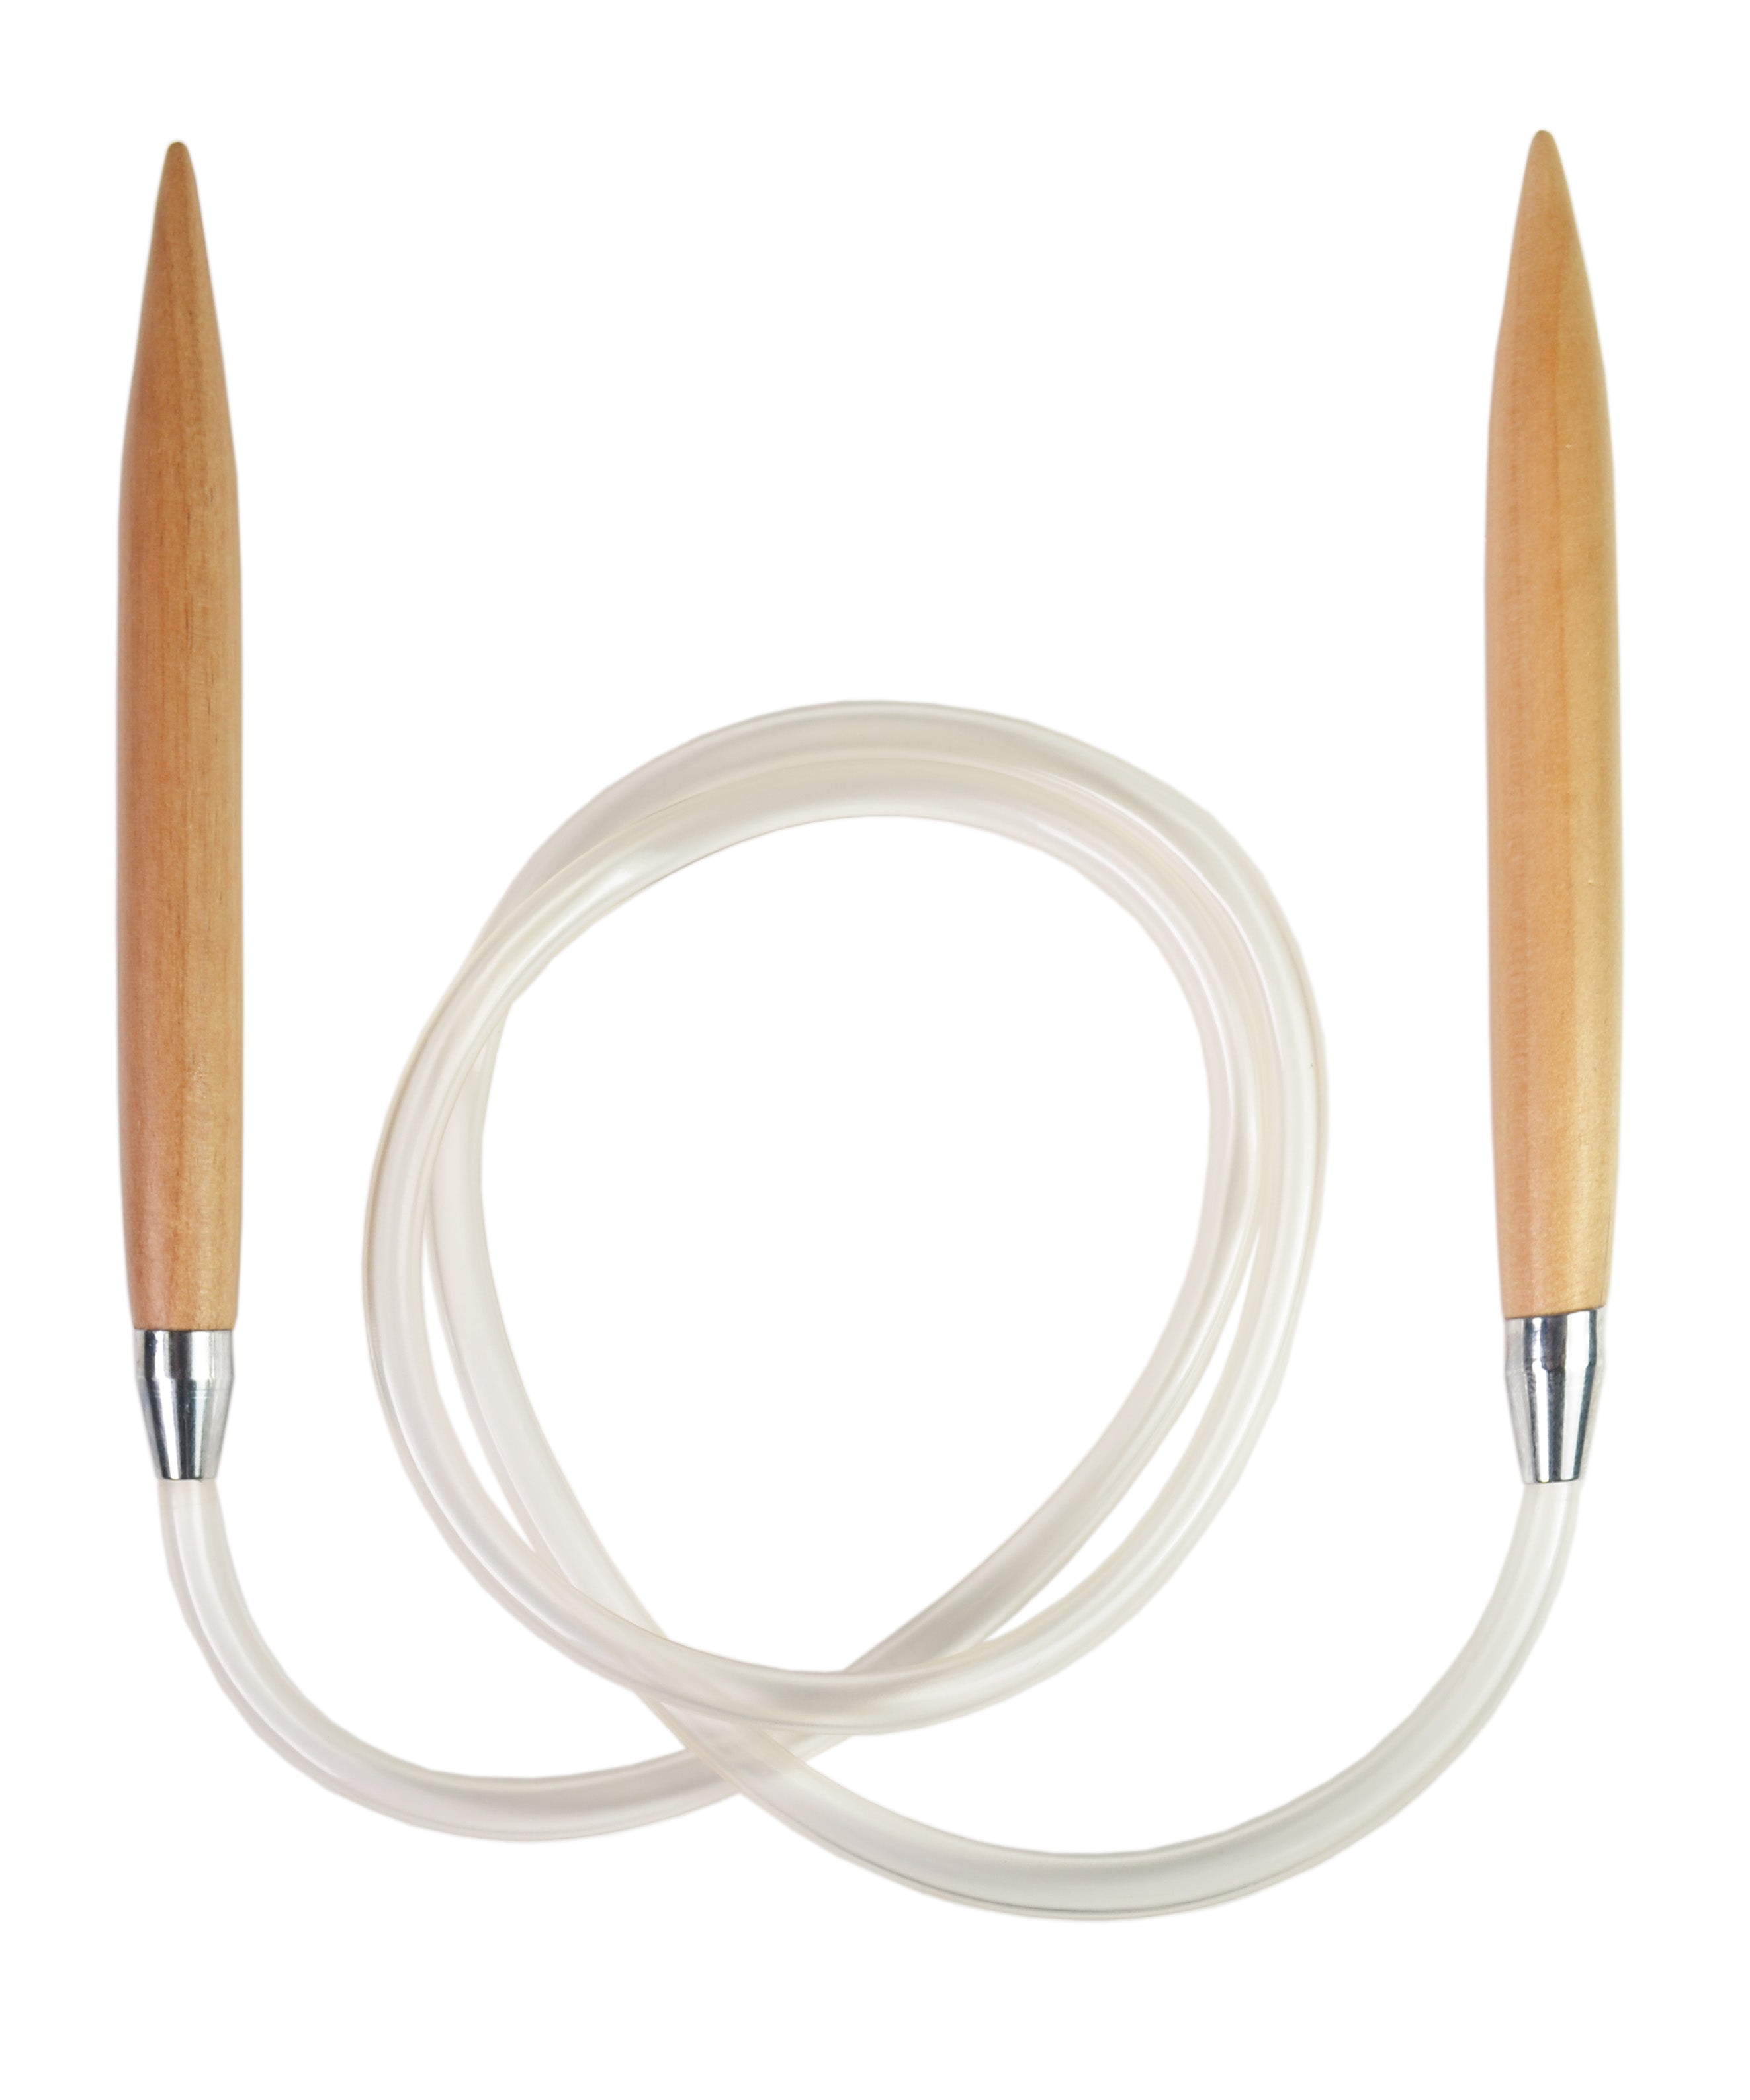 12 Inch or 16 Inch tip to Tip Bamboo Circular Knitting Needles US 11, 13  and 15 you Will Get 3 Pairs of Needles With Usa-made Tubing 